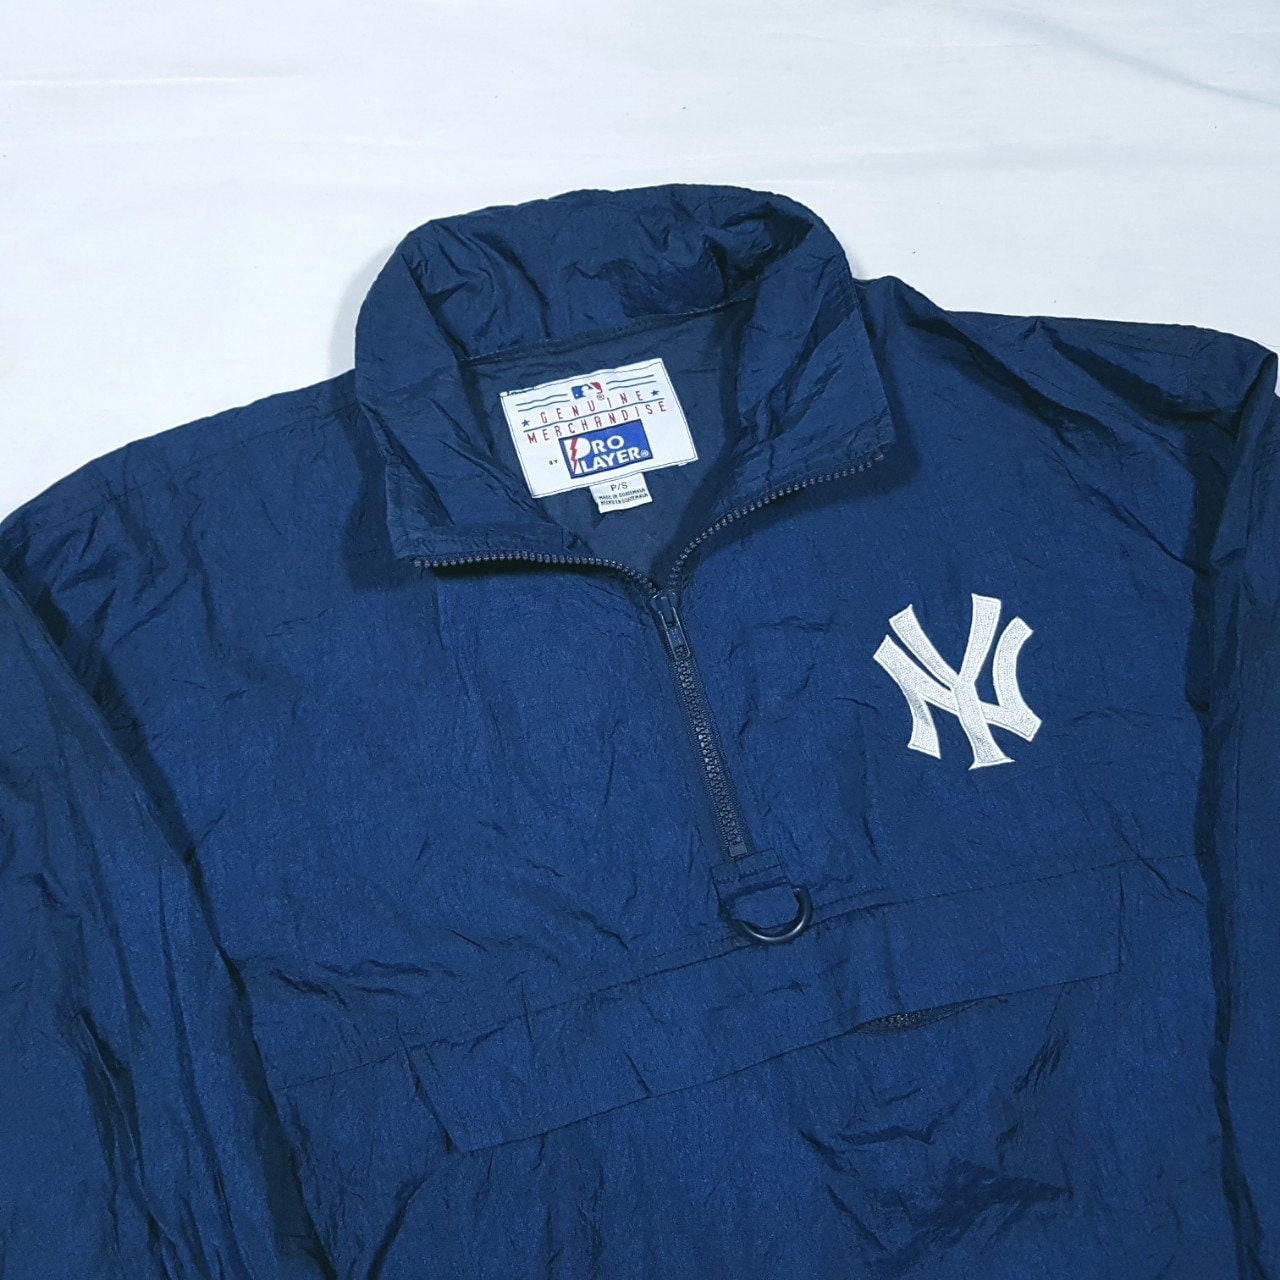 Mitchell & Ness Yankees Wool Blend Varsity Jacket in Blue for Men